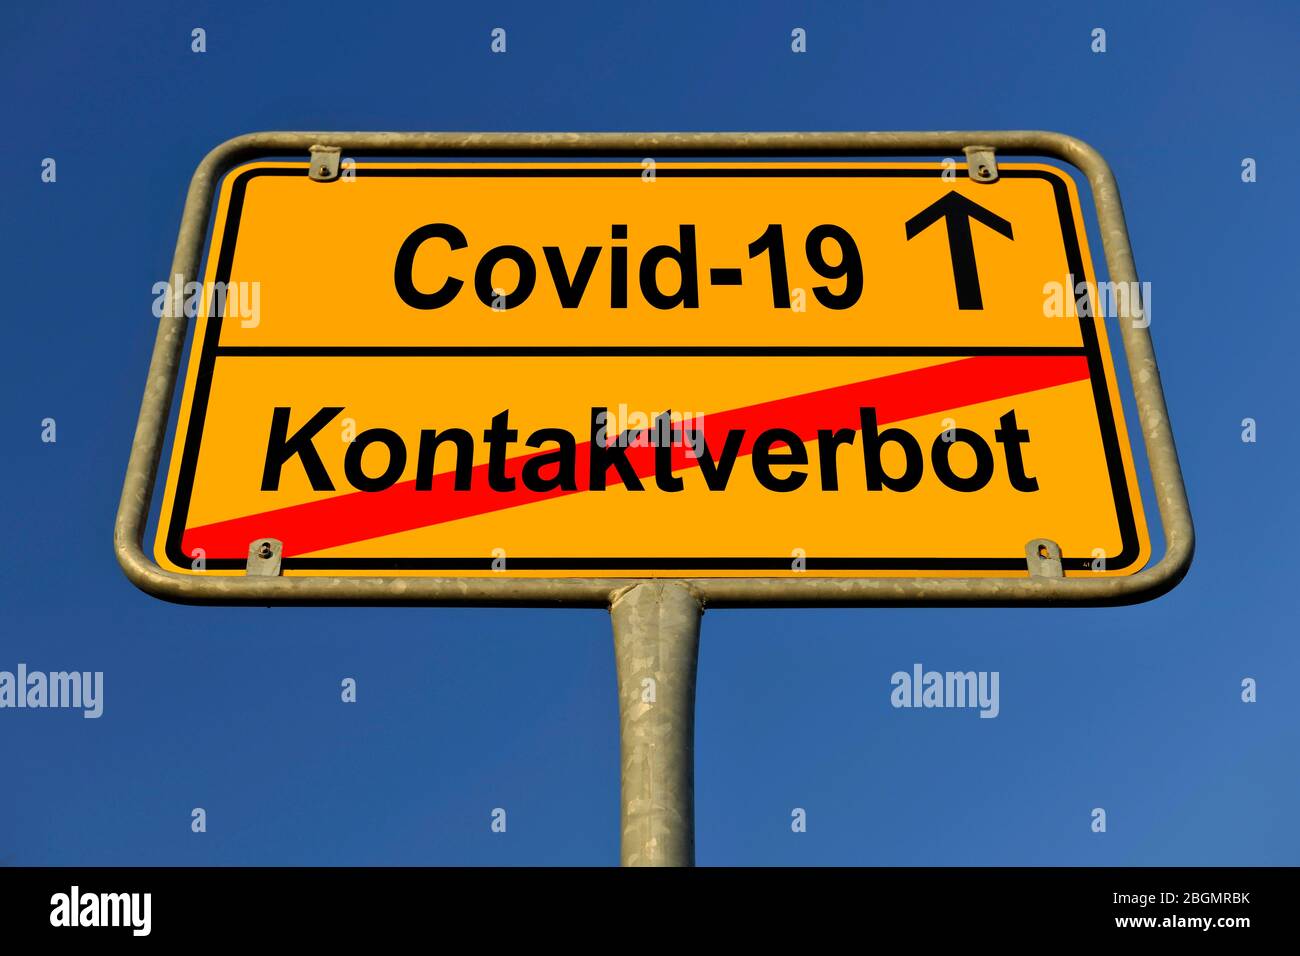 Digital Composing, symbolic image, place-name sign, lifting or easing of contact ban and curfew, Coronavirus, Covid-19, Germany Stock Photo